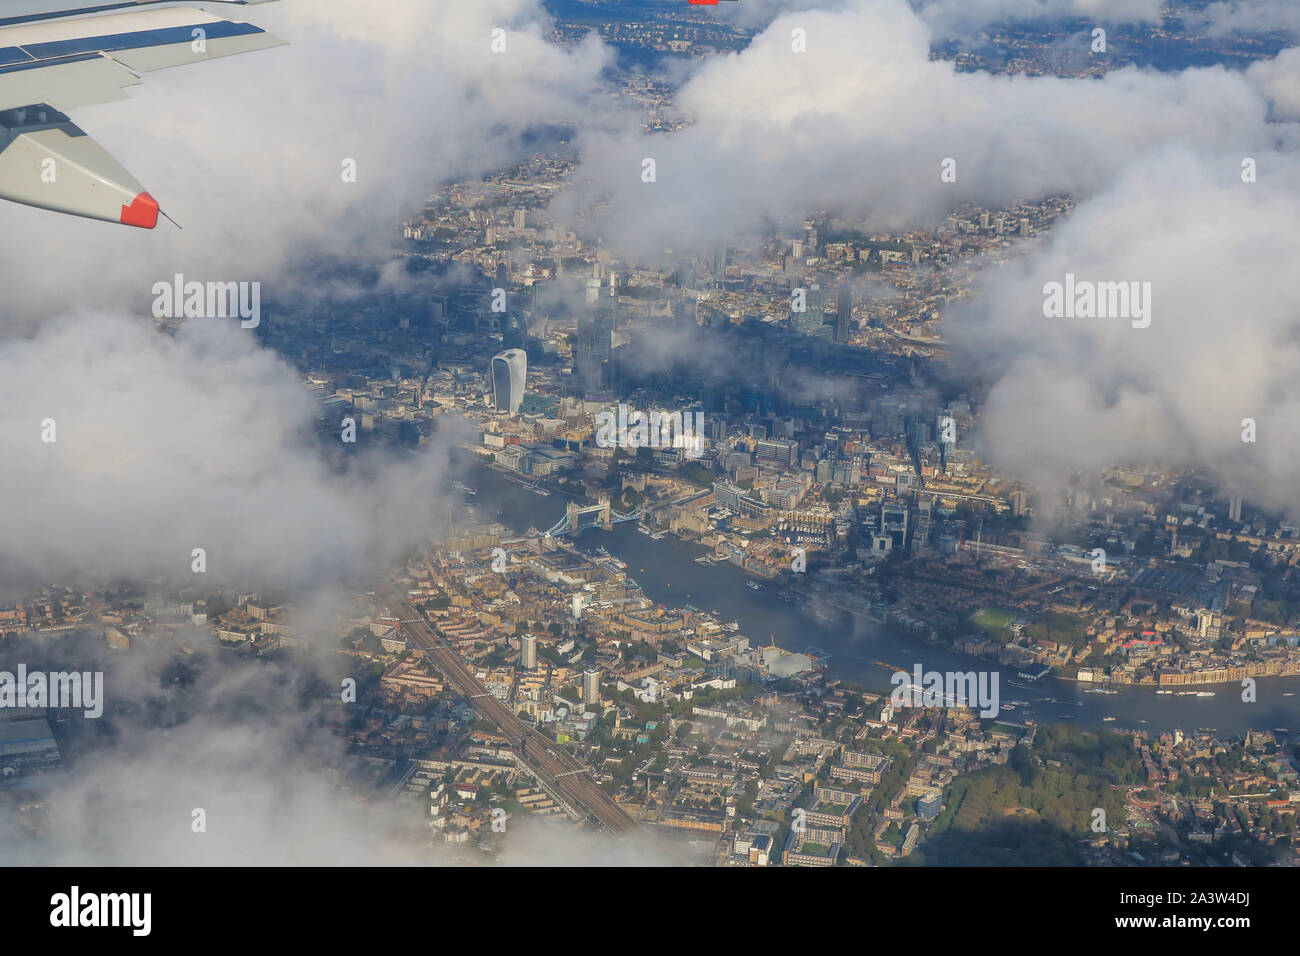 London, UK. 9th Oct, 2019. An aerial view of the Tower Bridge landmark and the city of London financial district. Credit: Amer Ghazzal/SOPA Images/ZUMA Wire/Alamy Live News Stock Photo